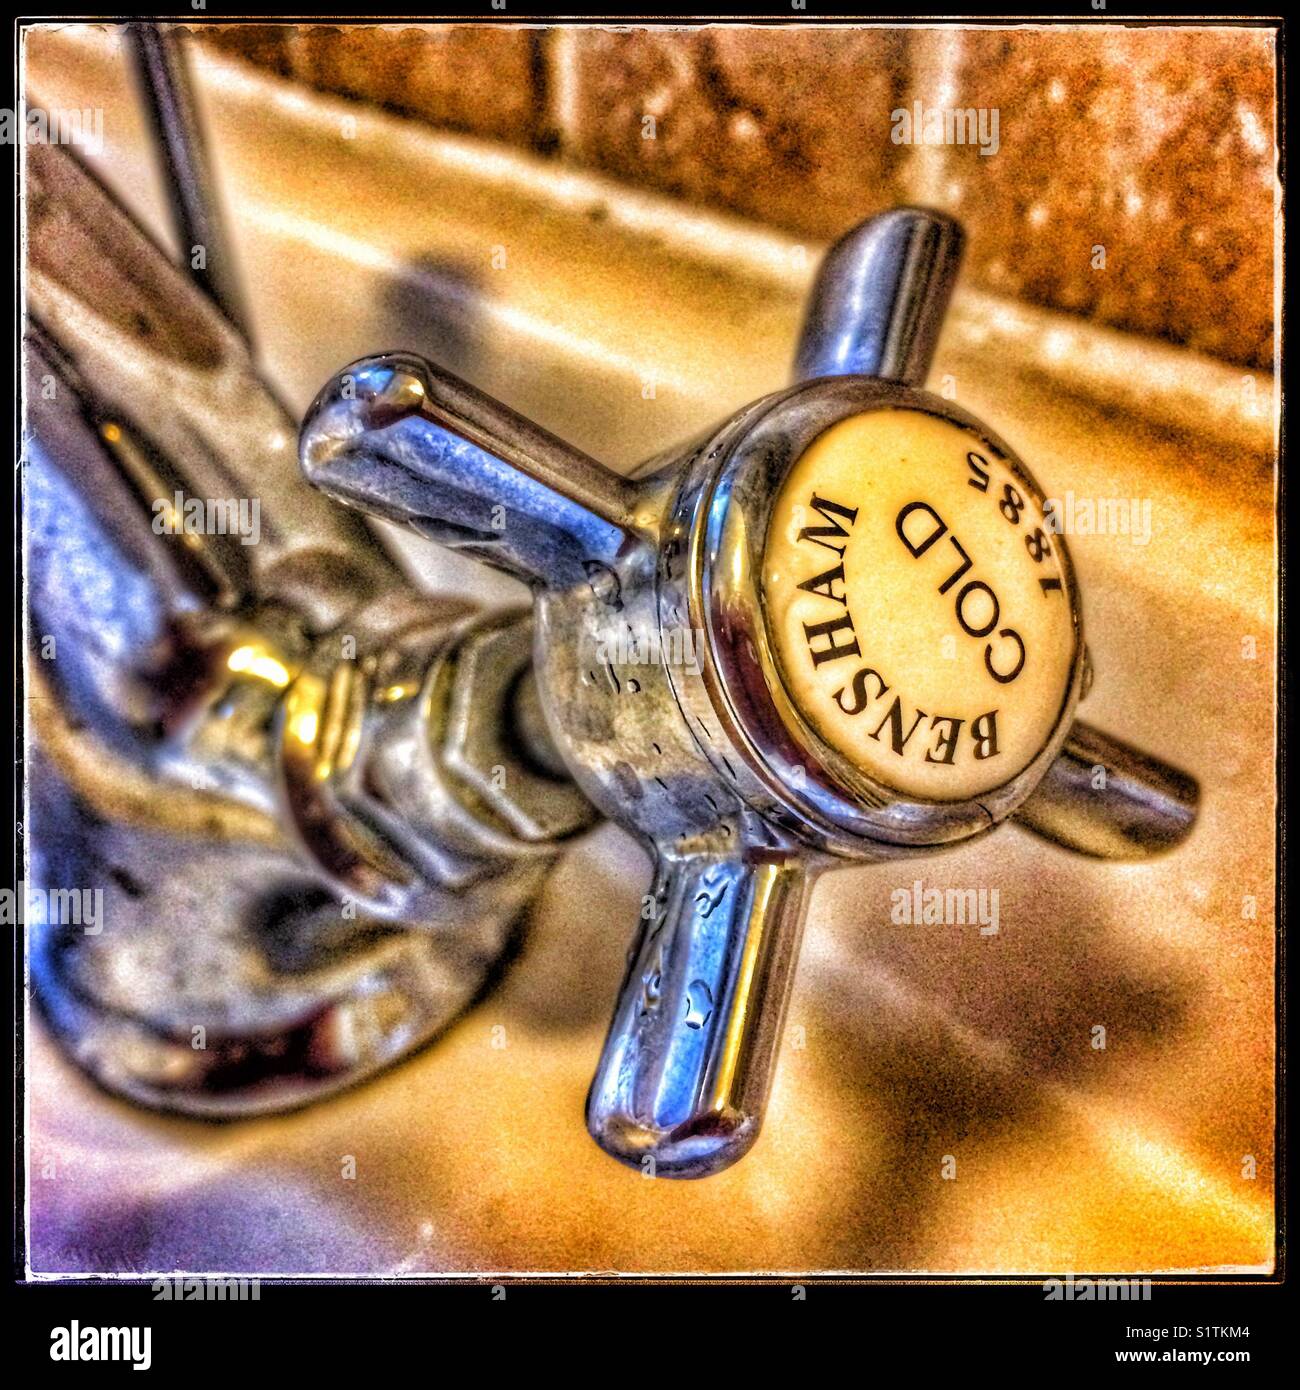 Col water tap Stock Photo